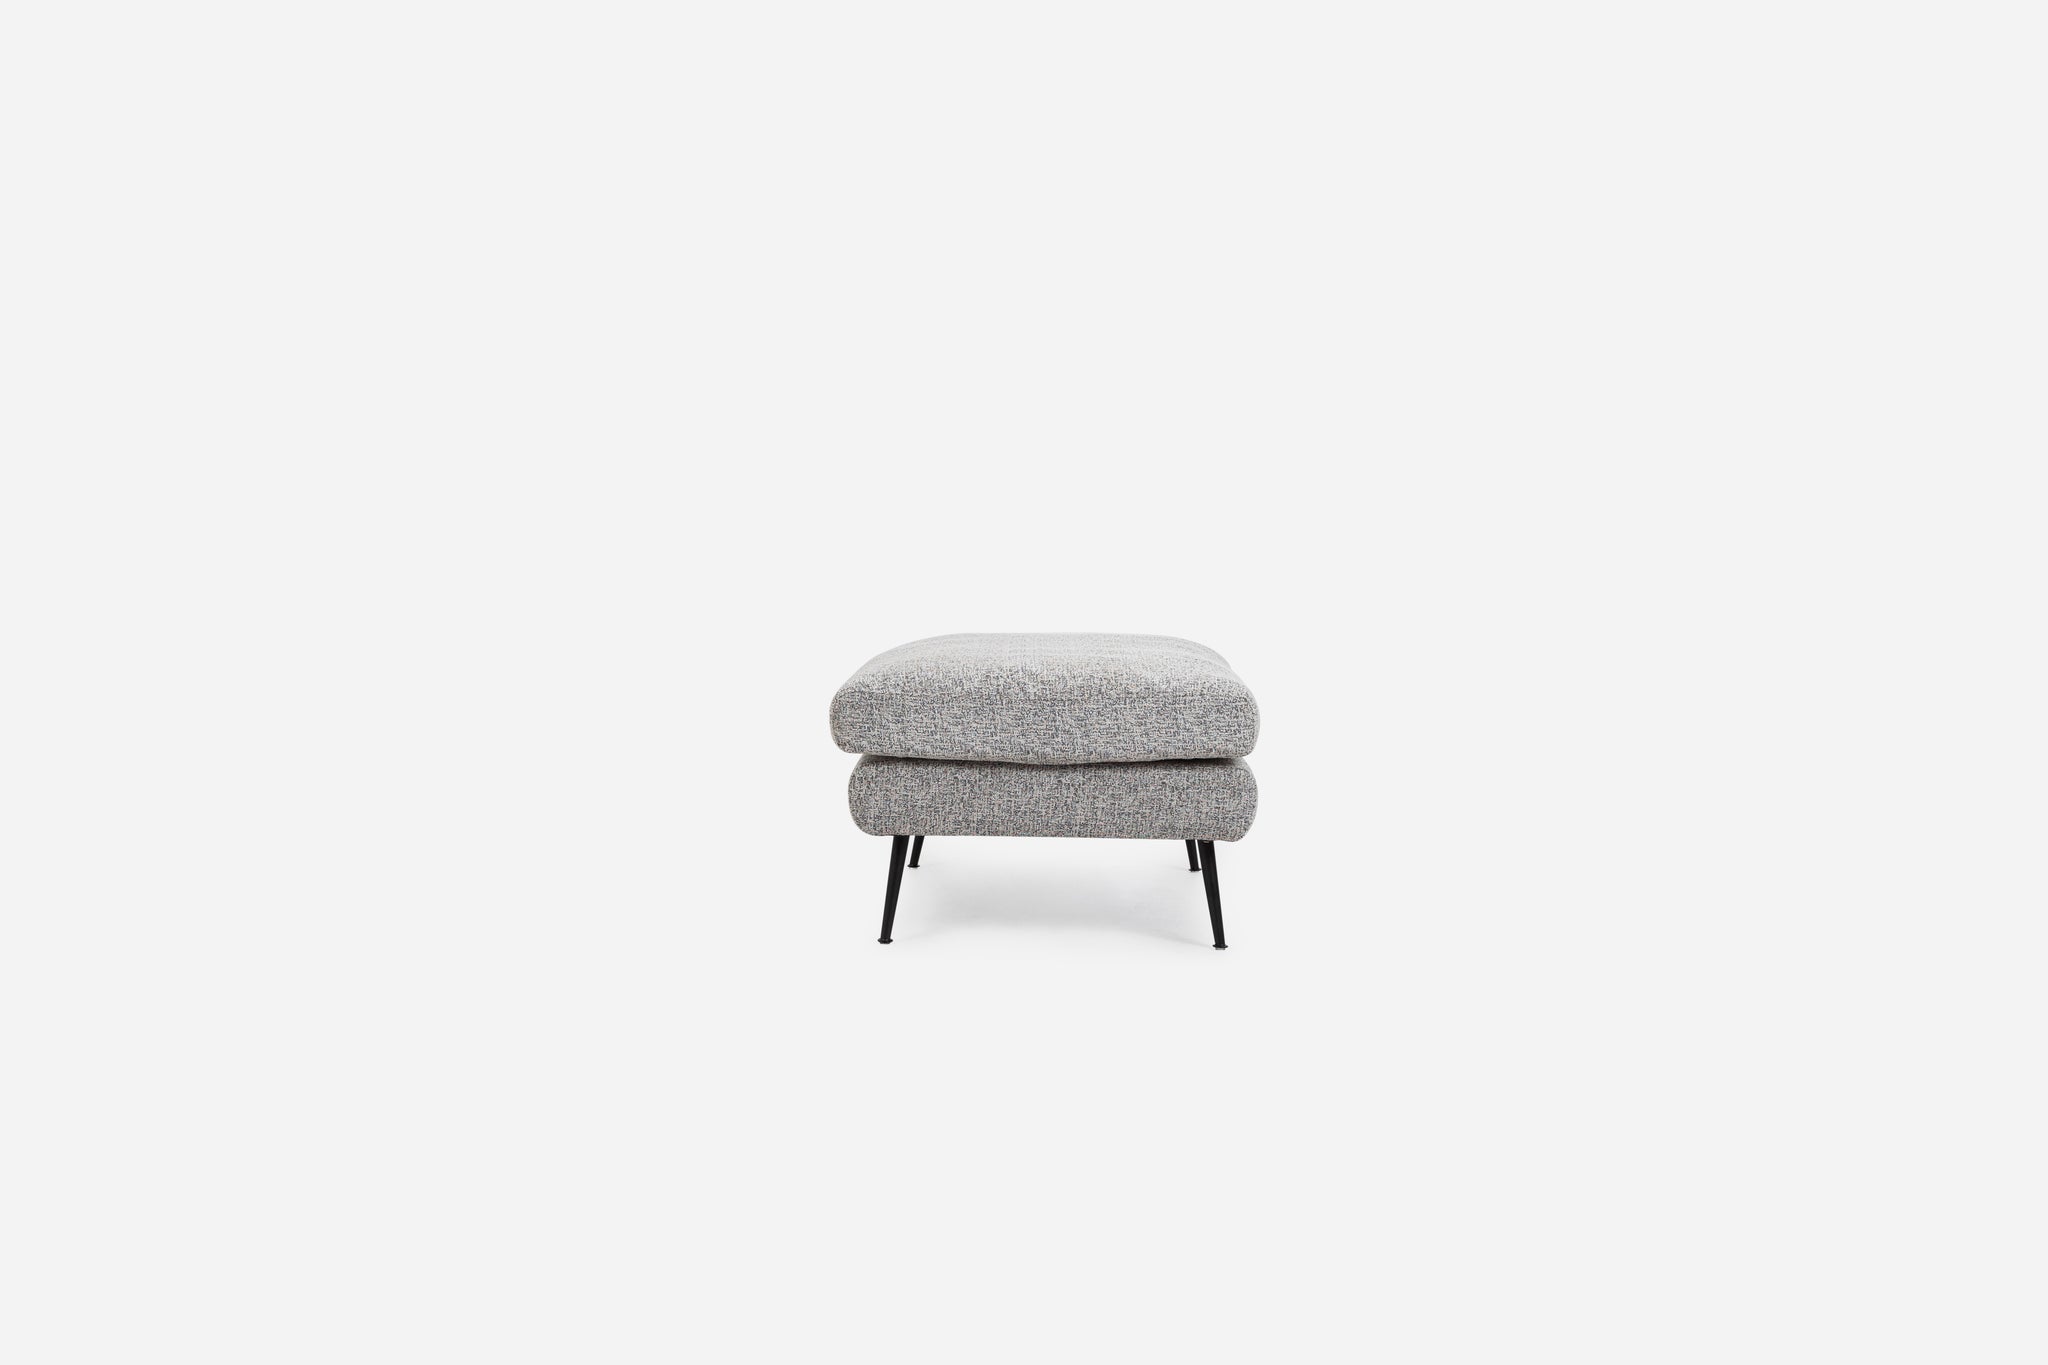 park ottoman shown in grey fabric with black legs